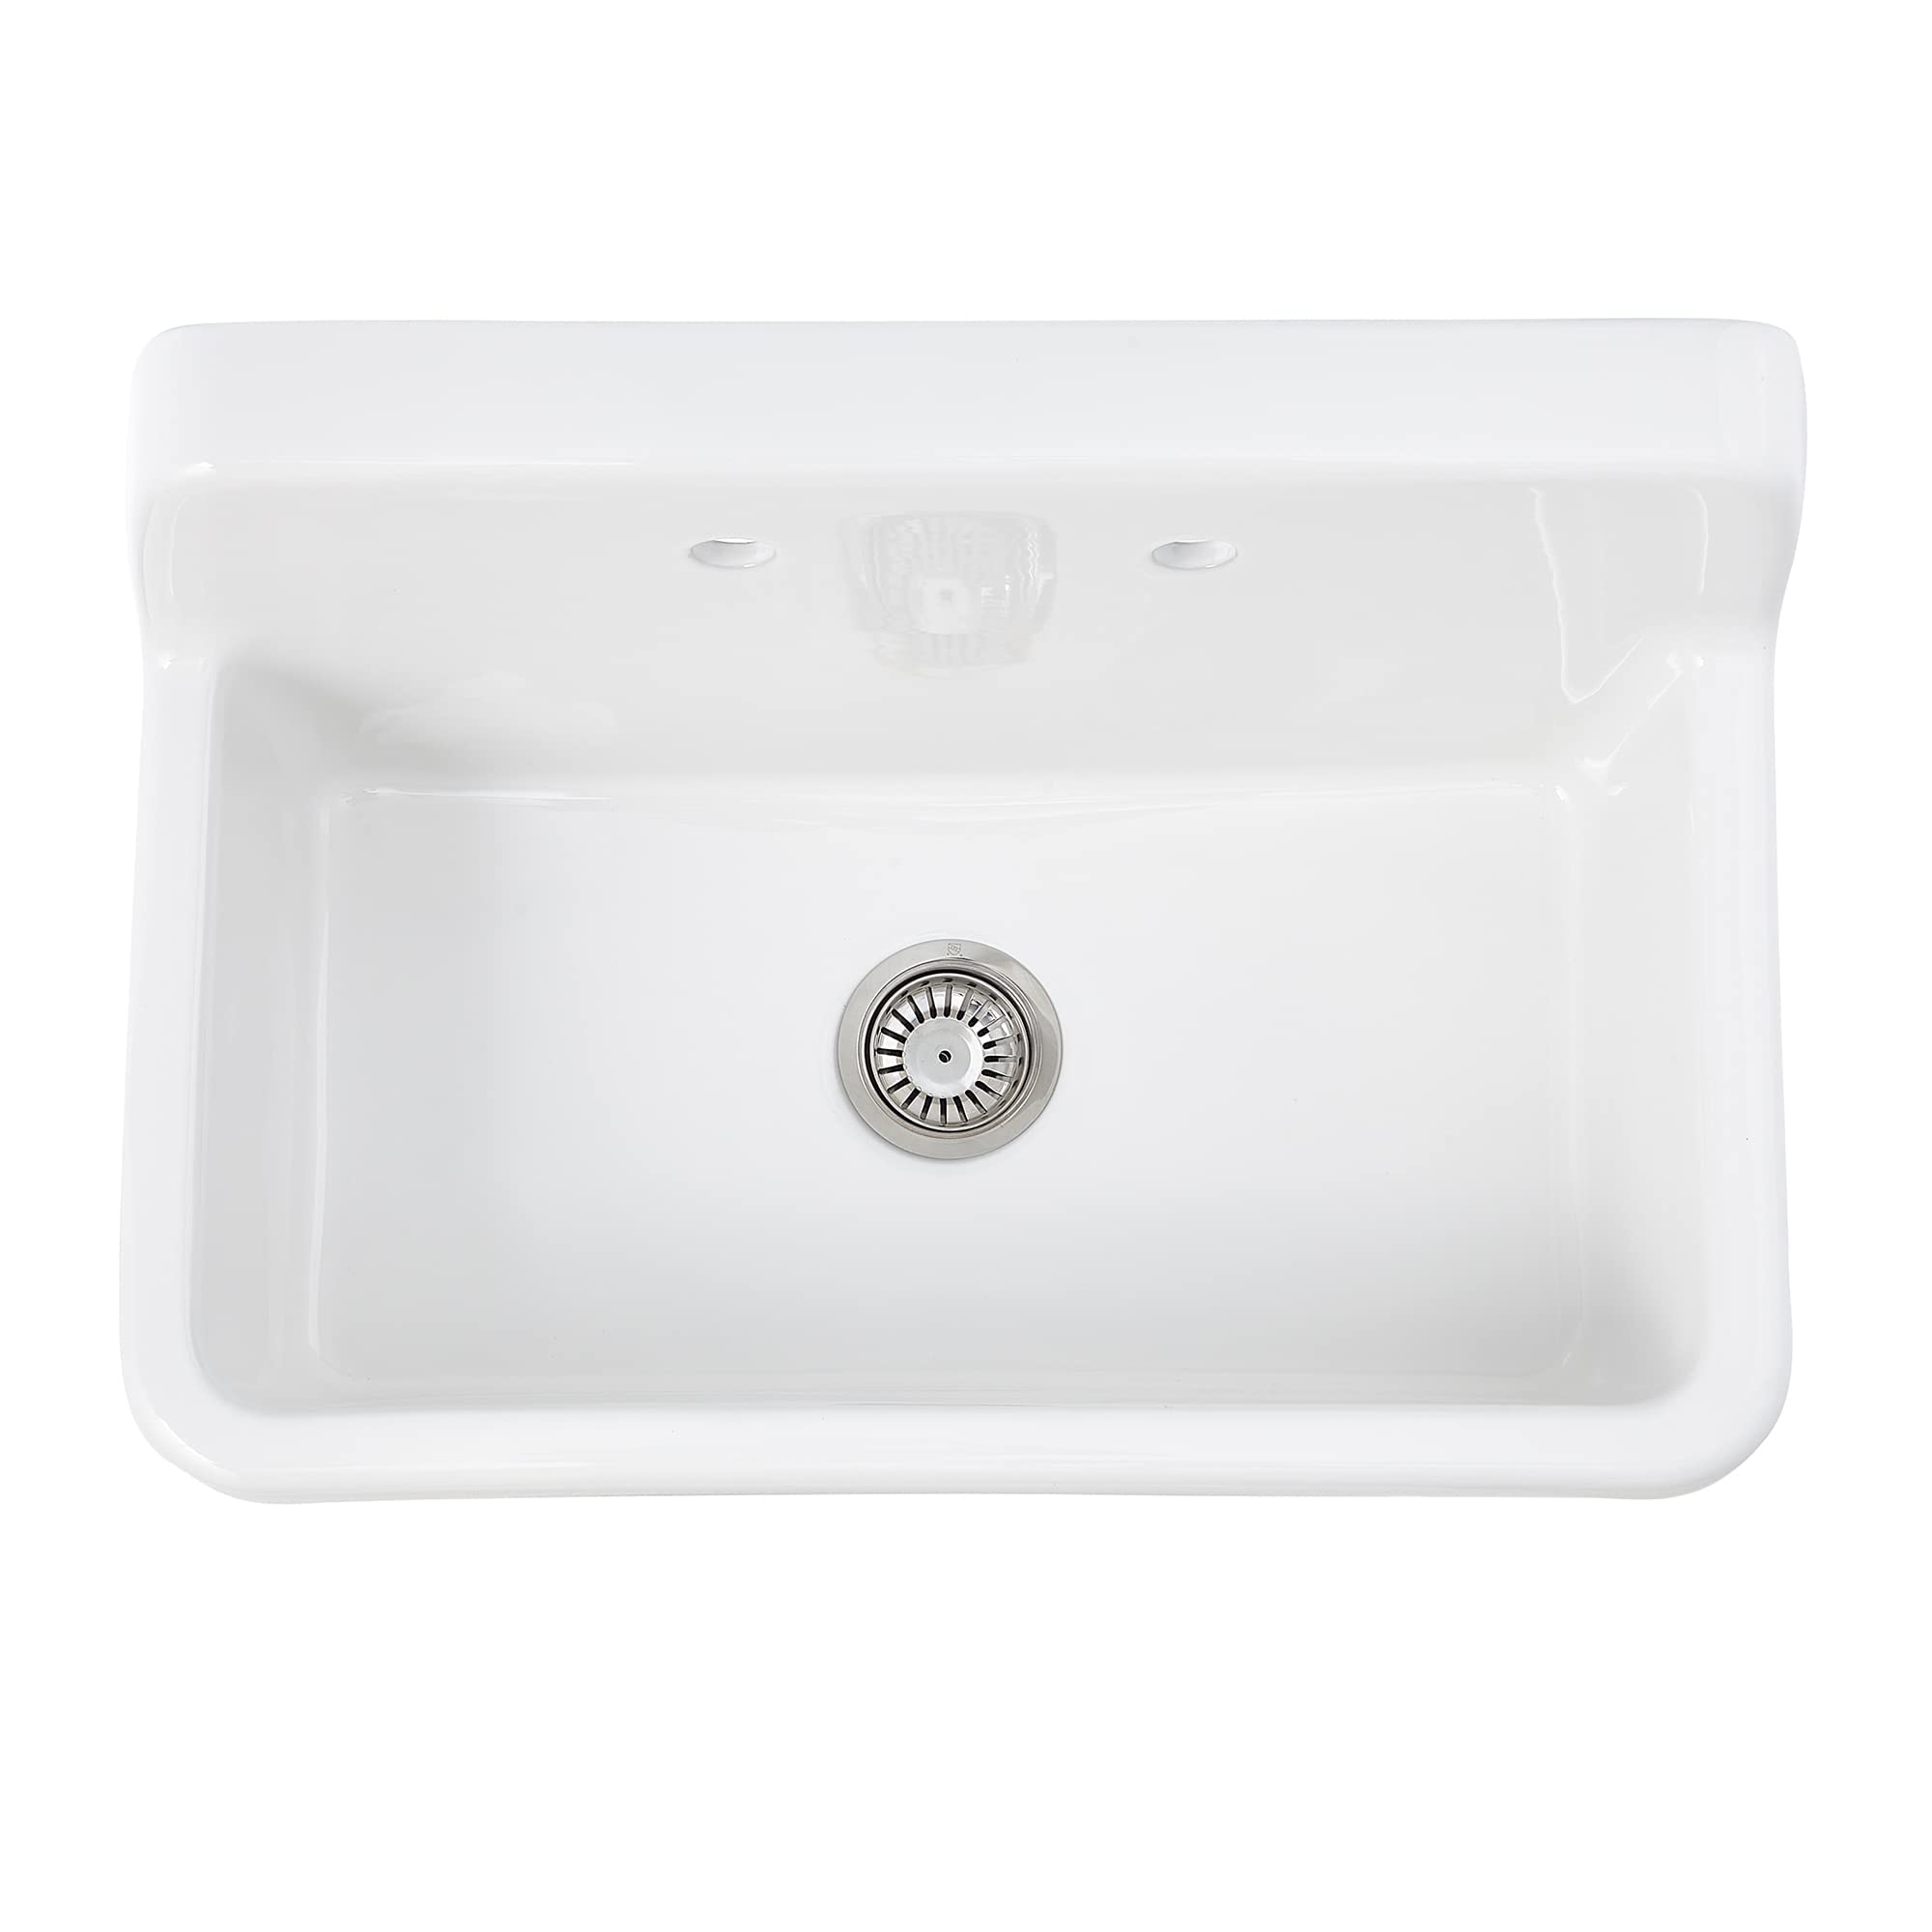 ELLAI 30 Inch White Wall Mount Utility Sink High Back Wall Mounted Ceramic Laundry Tub 15 Gallon Slop Sink for Laundry Room, Garage, Kitchen, Basement 30" x 19" x 18"